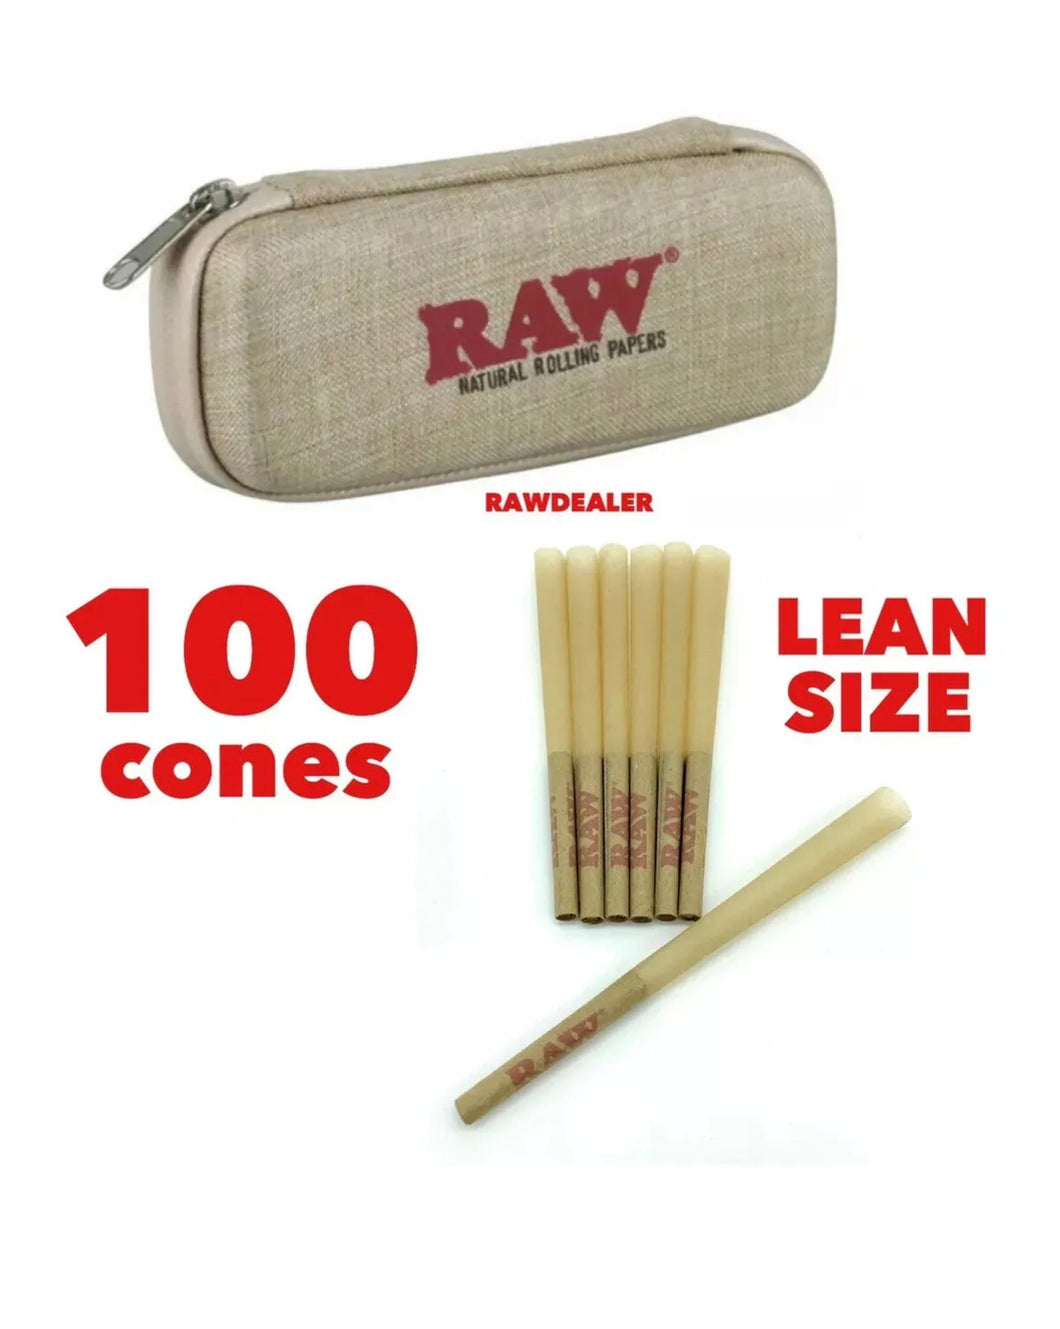 RAW Classic LEAN Size Pre-Rolled Cones (100 pk) + raw Cone Wallet